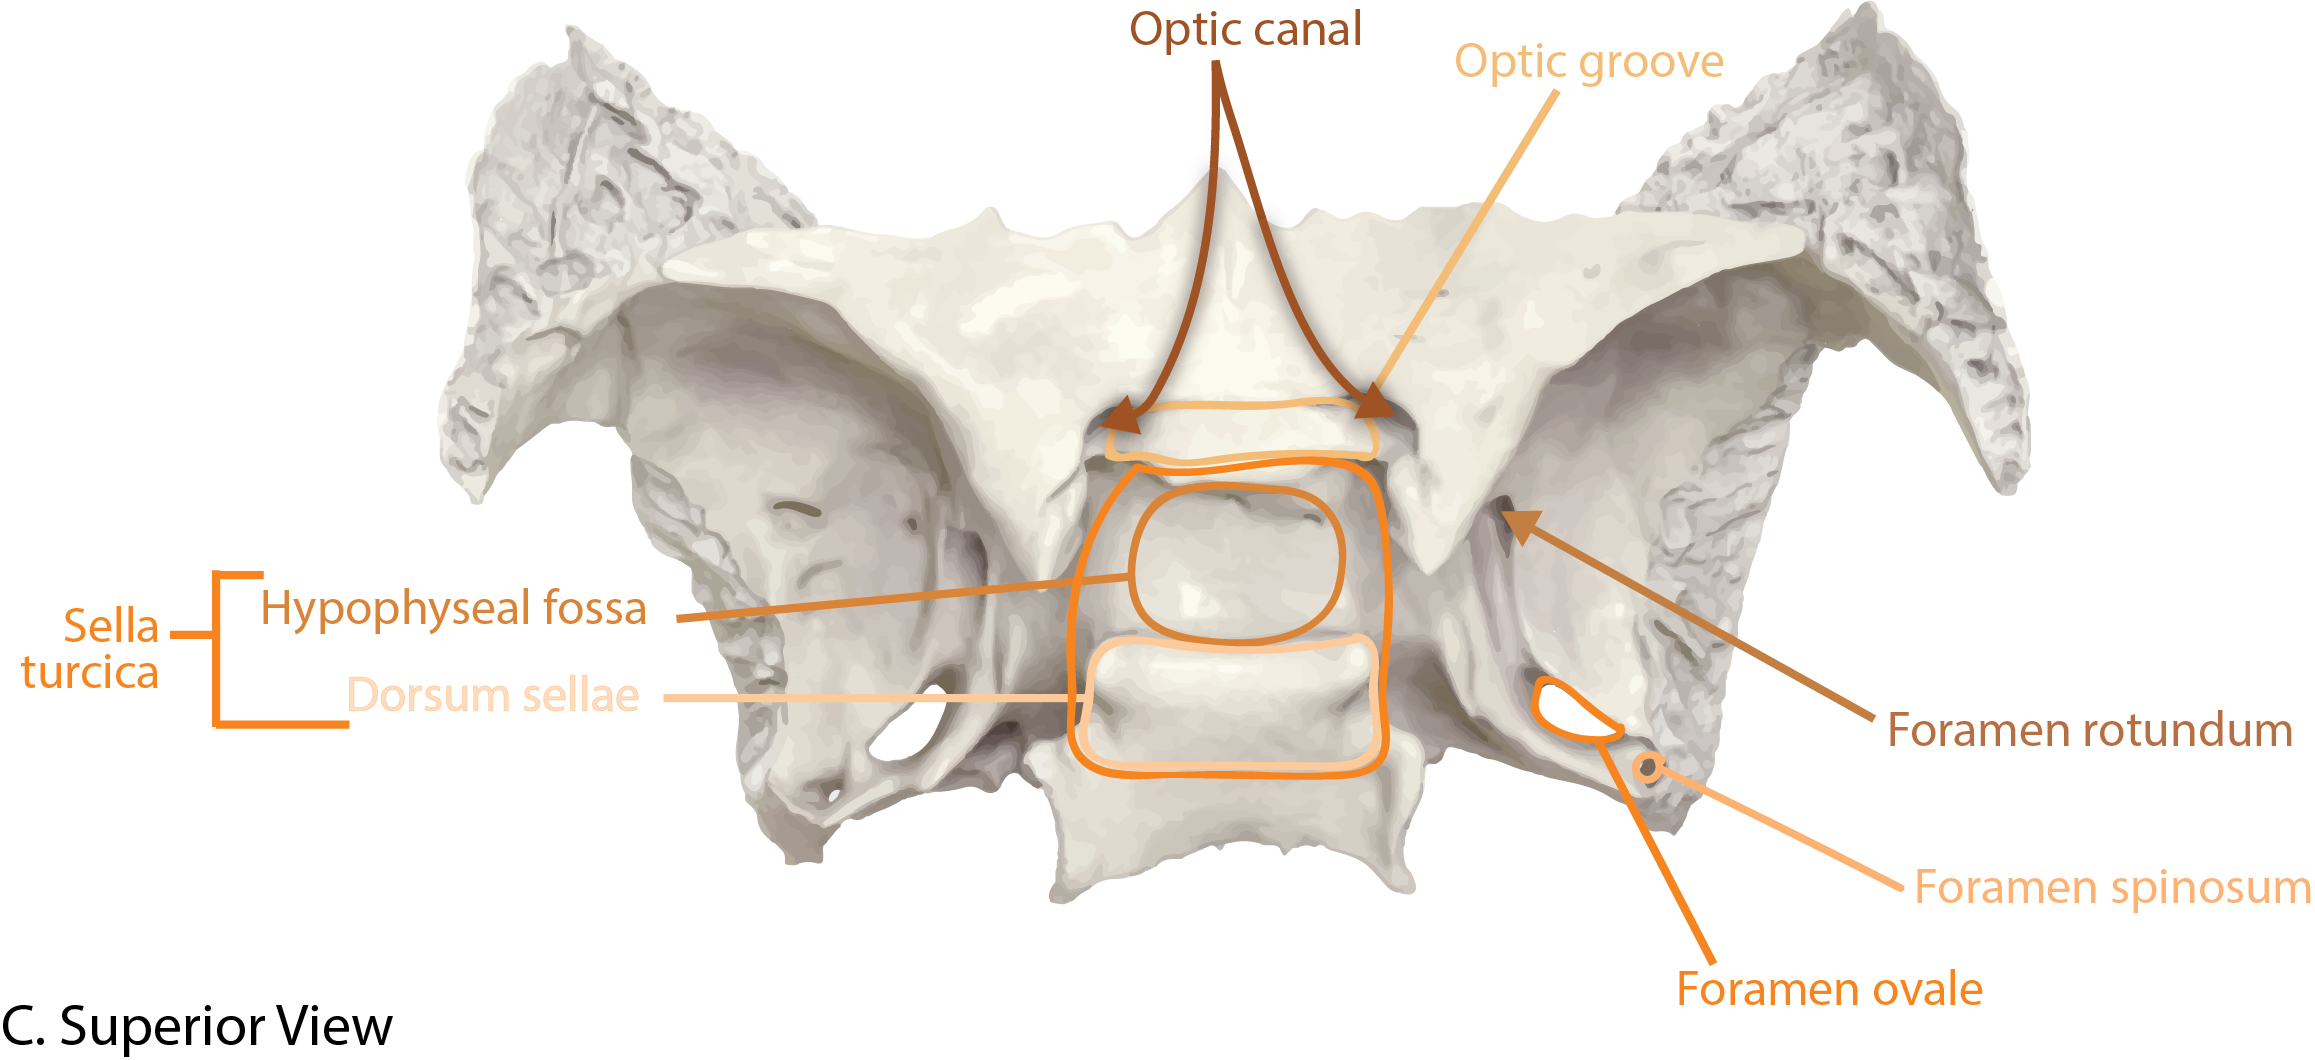 Sphenoid Bone Superior View with Landmarks Labeled